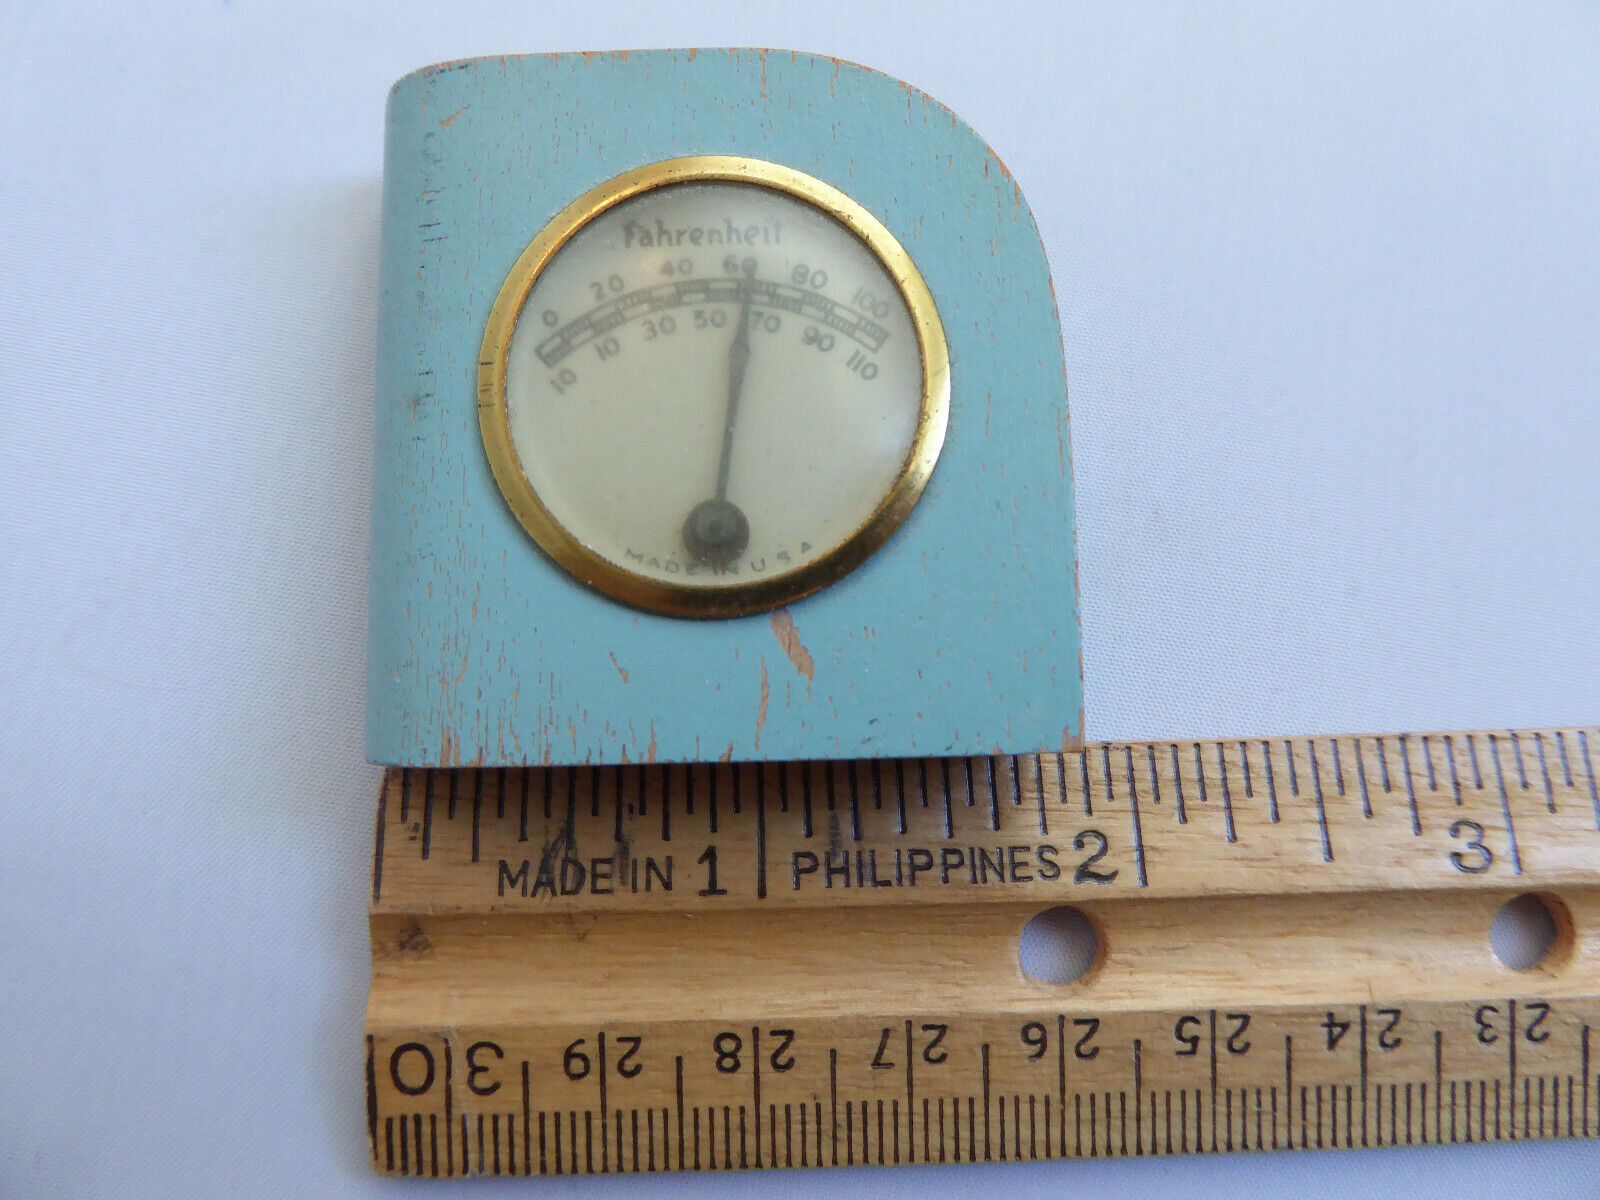 Vintage Fahrenheit Temperature Gauge Mounted In Wood Made in USA Small